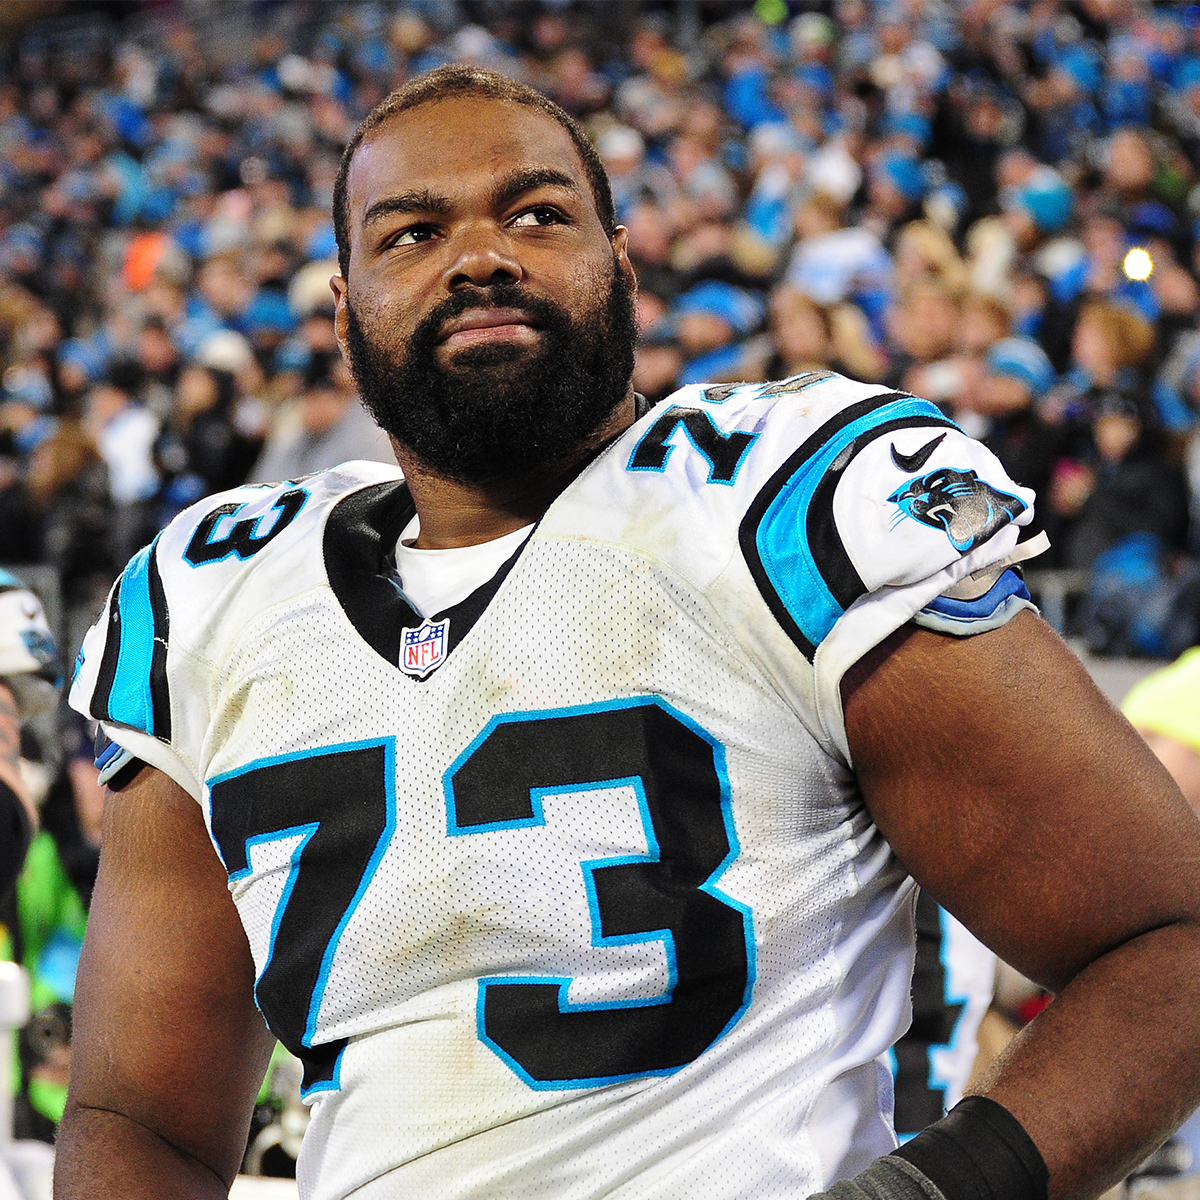 Blind Side Subject Michael Oher Addresses “Difficult” Lawsuit